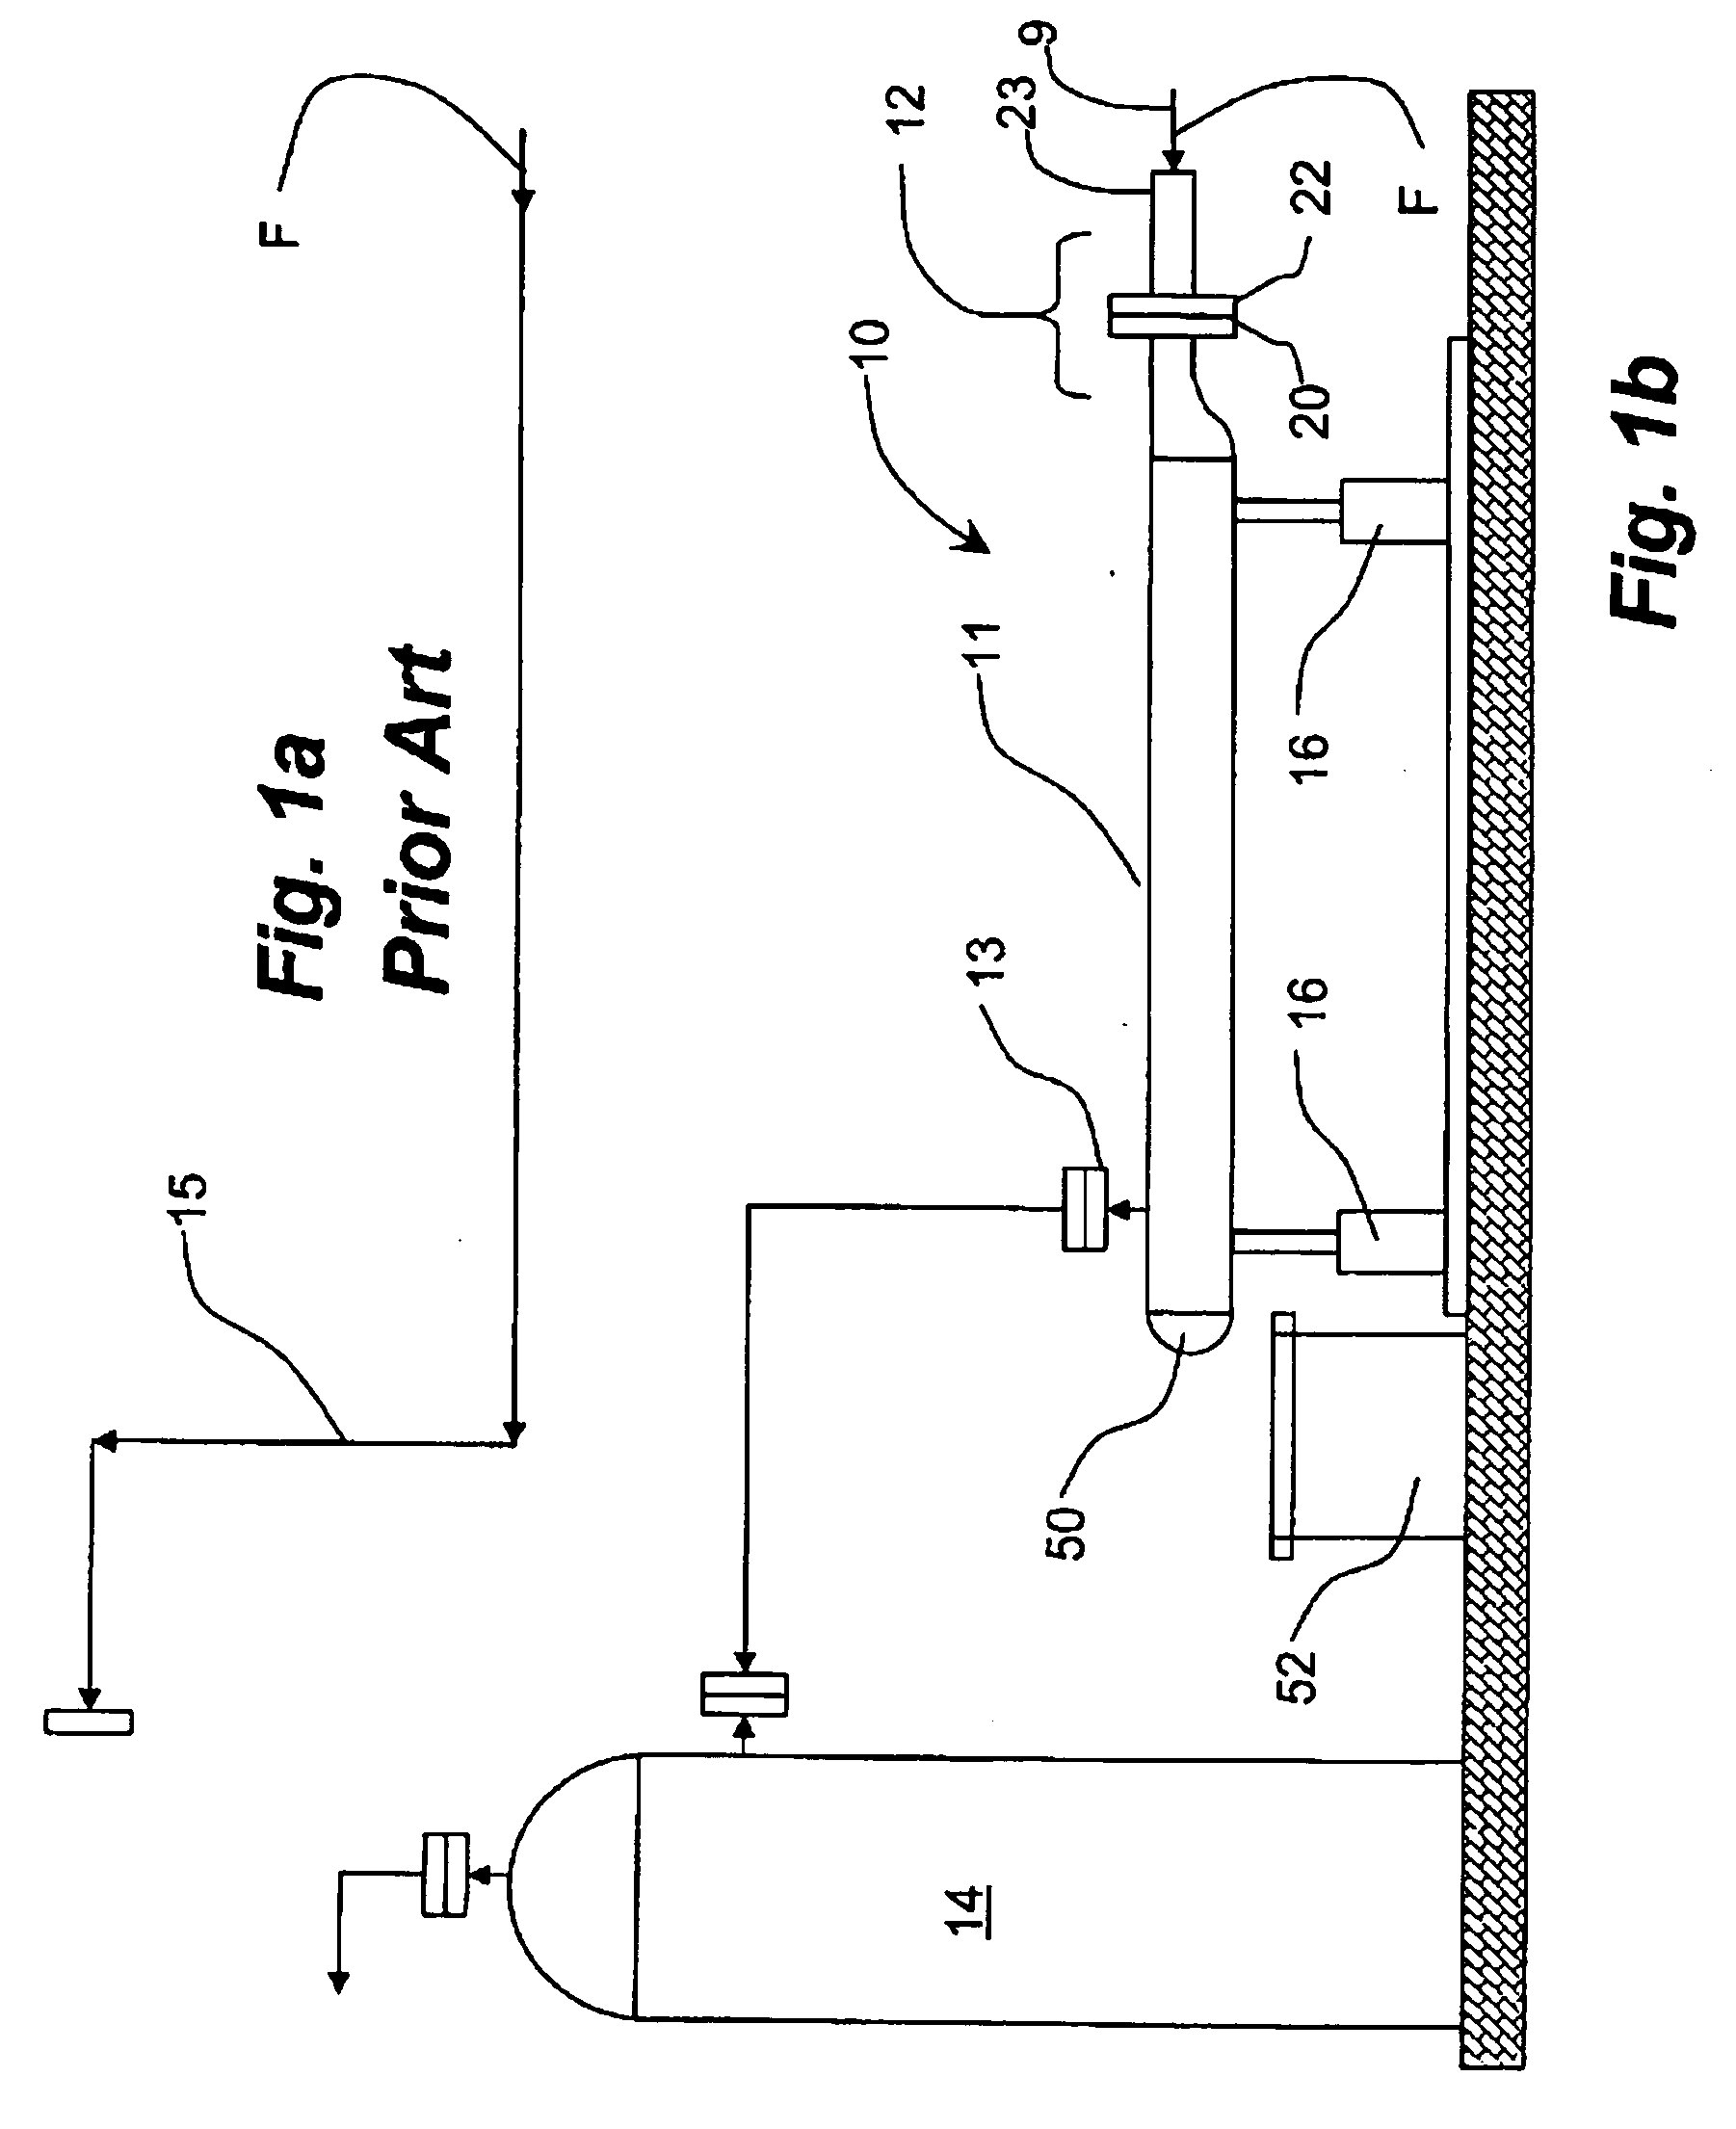 Desanding apparatus and system